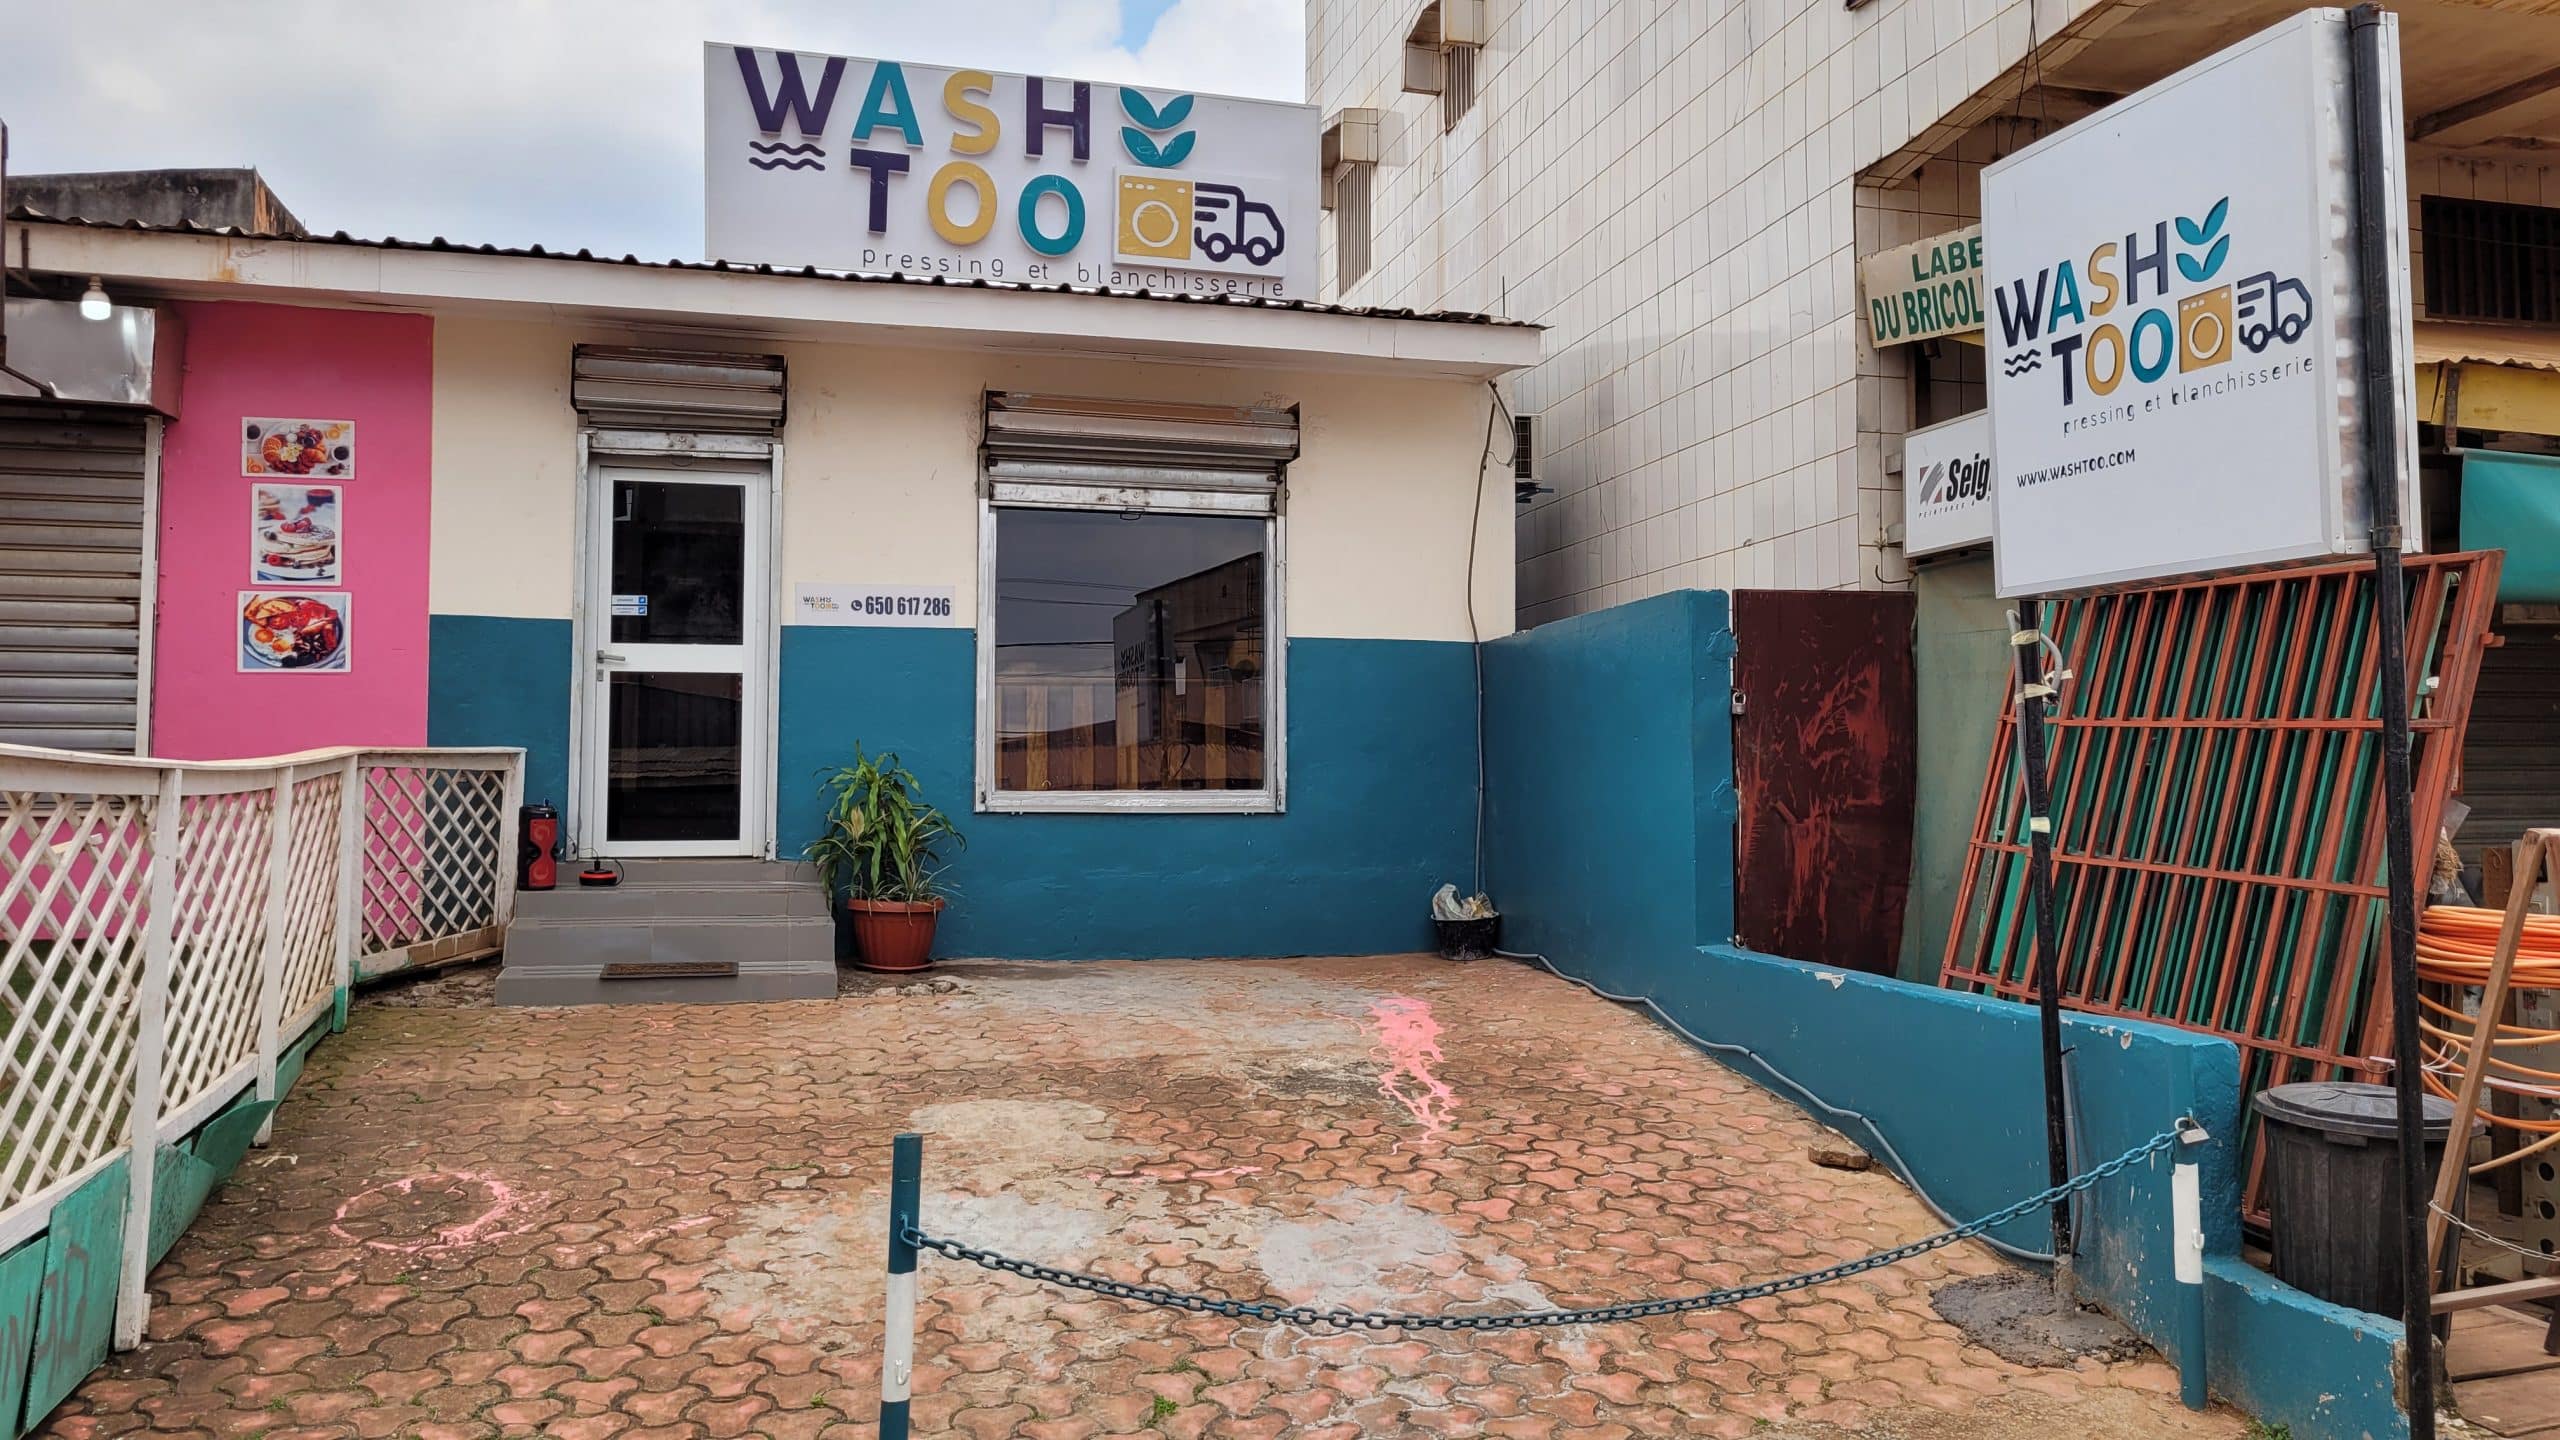 Washtoo dry cleaning services